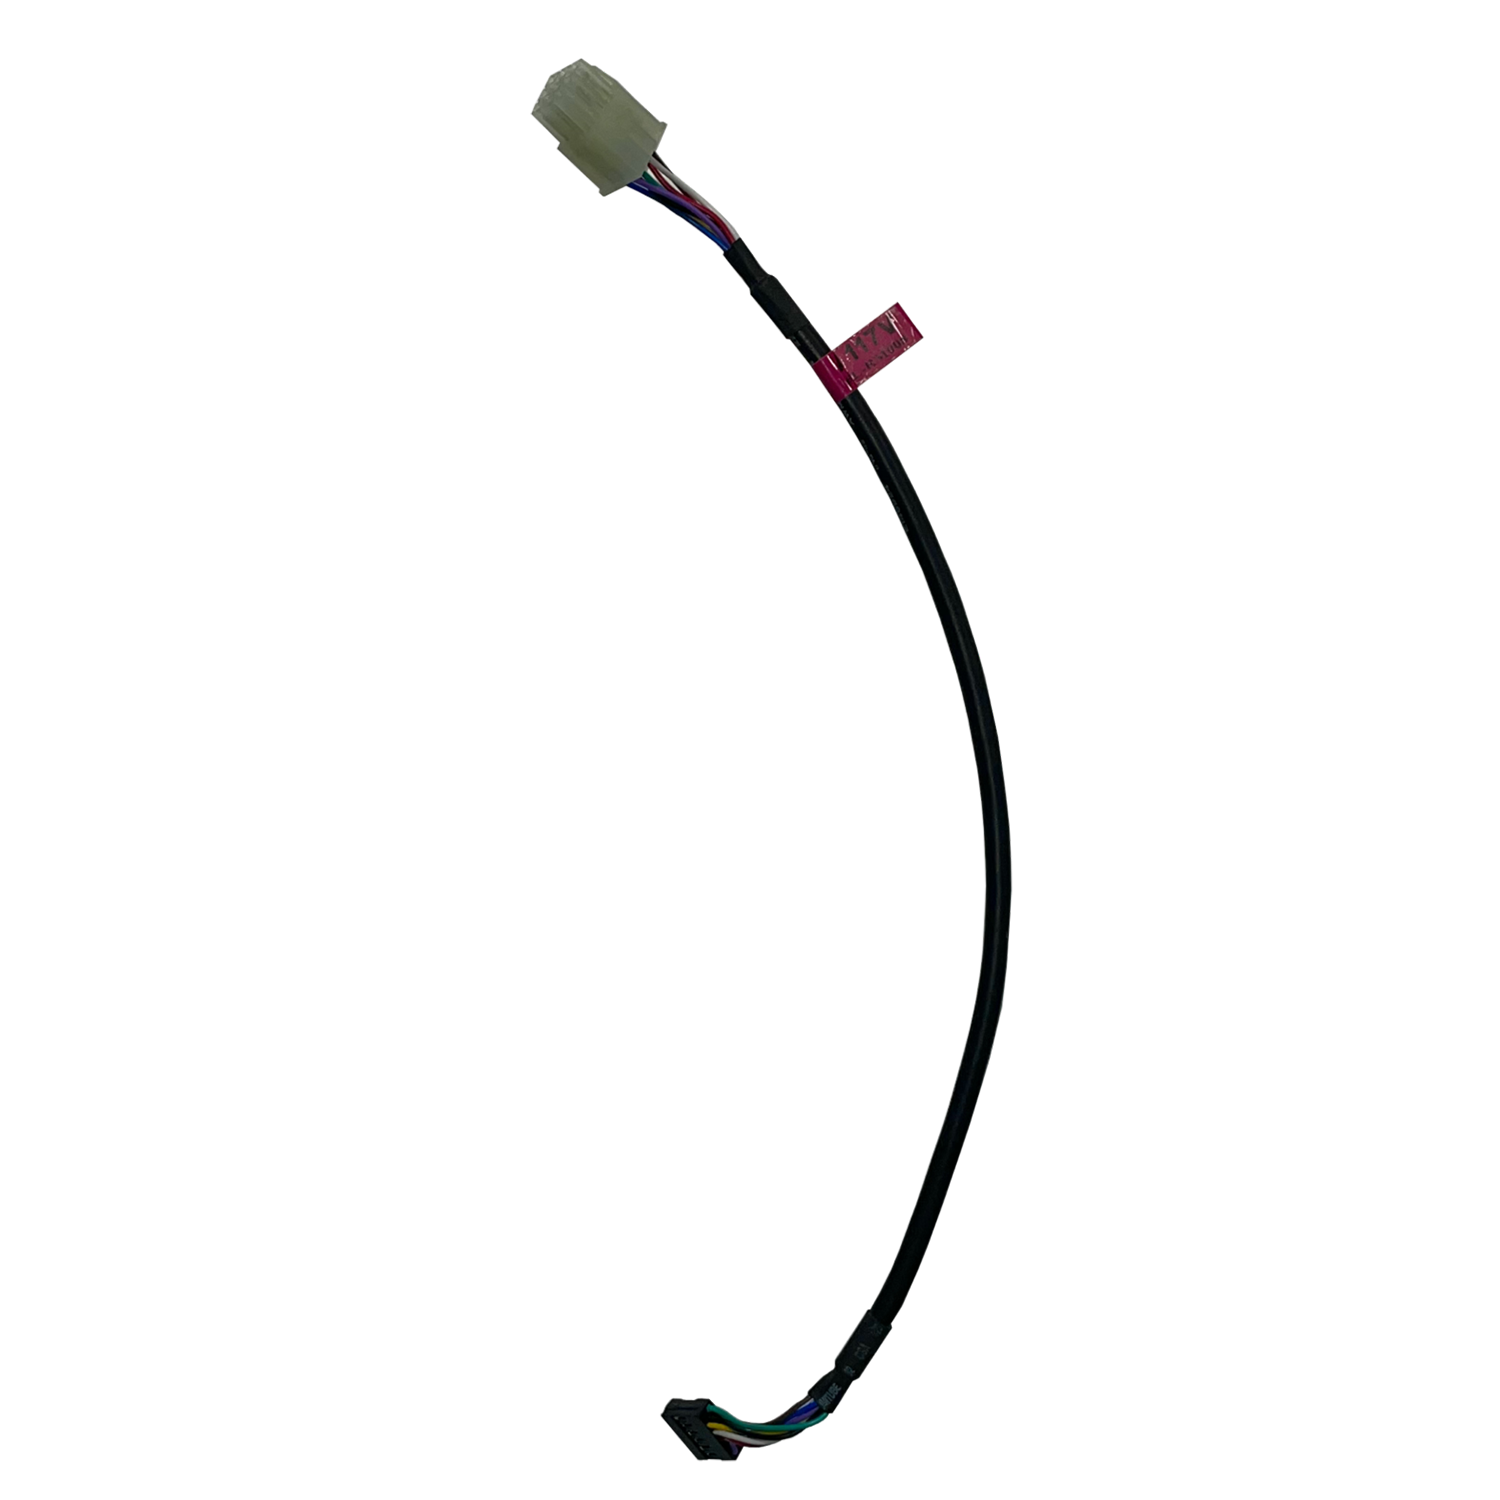 These power cables connect to the 9-pin connector of your harness and convert that power to a connector in which comes standard on all our MEI and ICT bill acceptors.